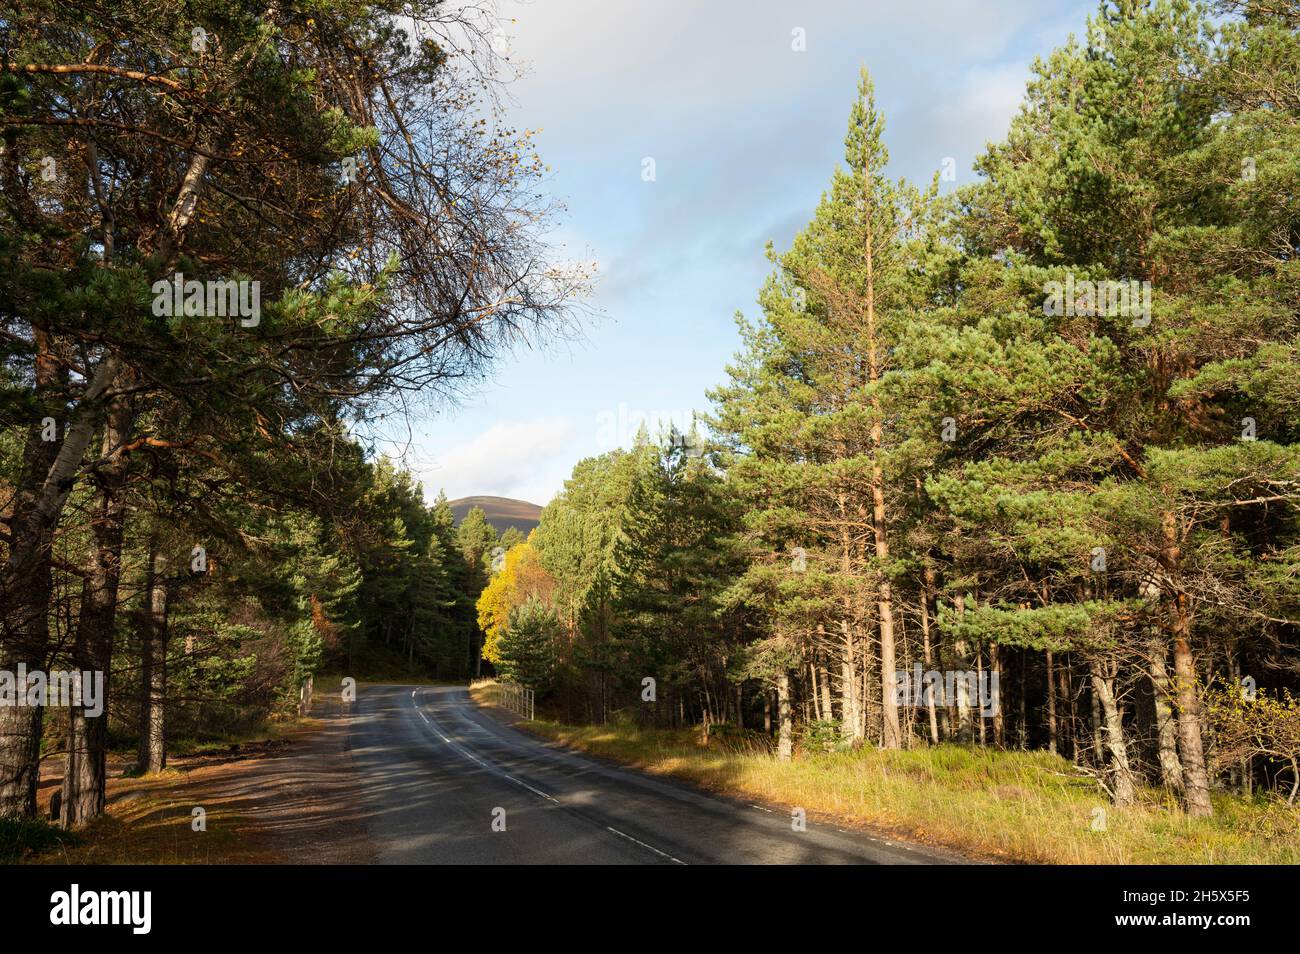 Curving road through Caledonian pine forest with mountain in background. Blue sky and cloud. No people or vehicles. Cairngorms National Park. Stock Photo